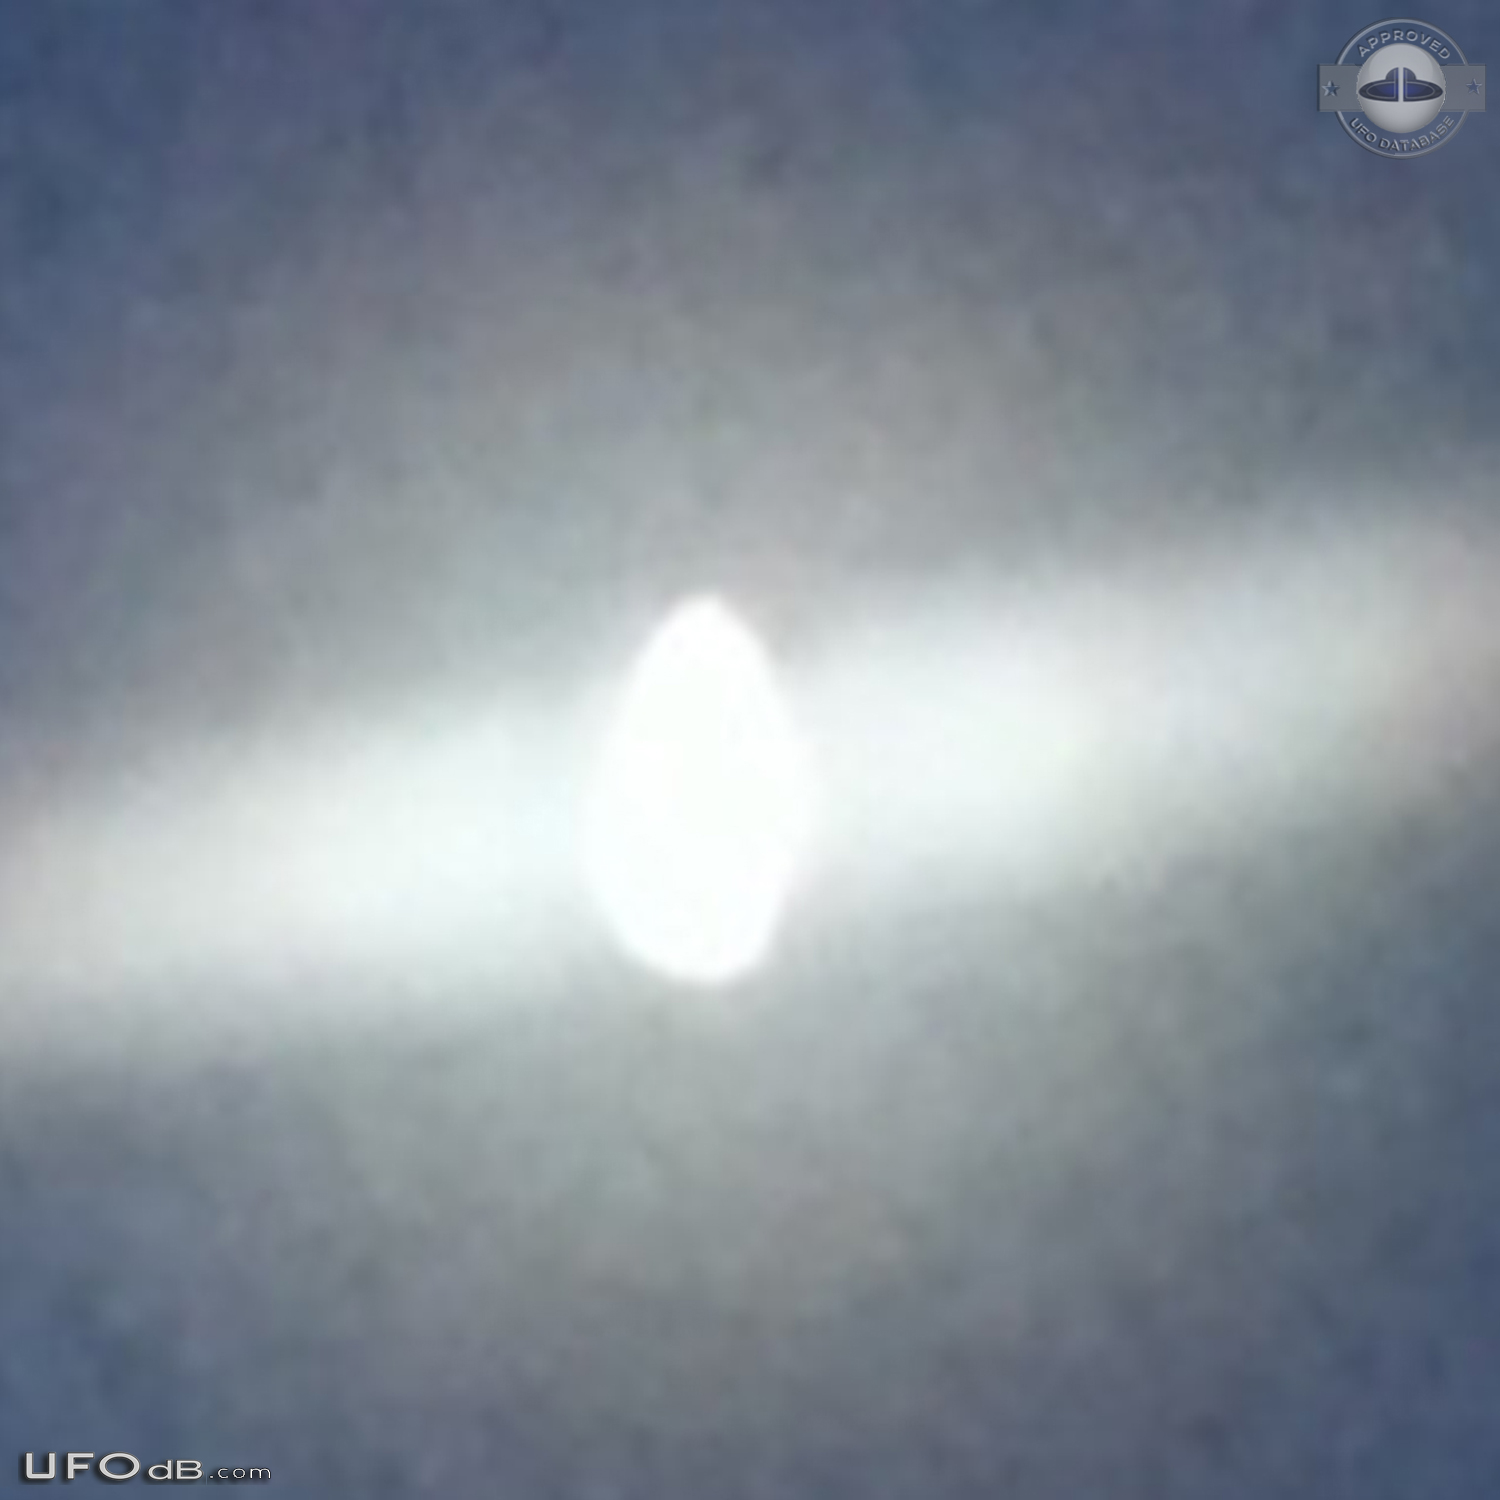 Bright Glowing Egg Shaped UFO over Bay of Plenty New Zealand 2012 UFO Picture #692-2